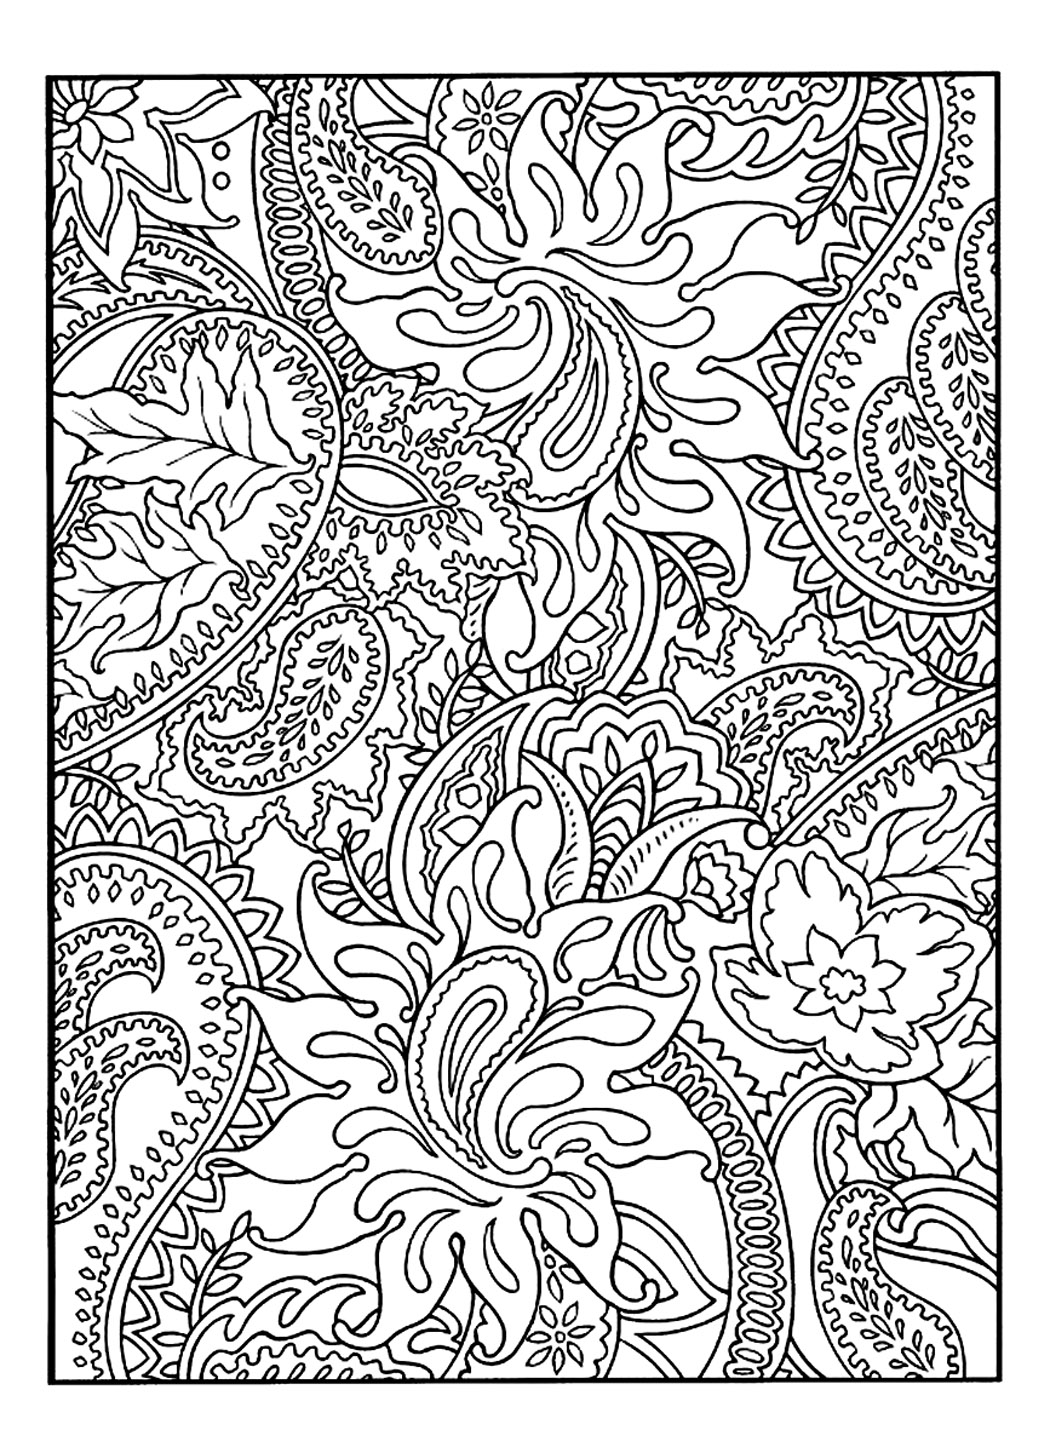 Drawing to colour full of flowers & leaves